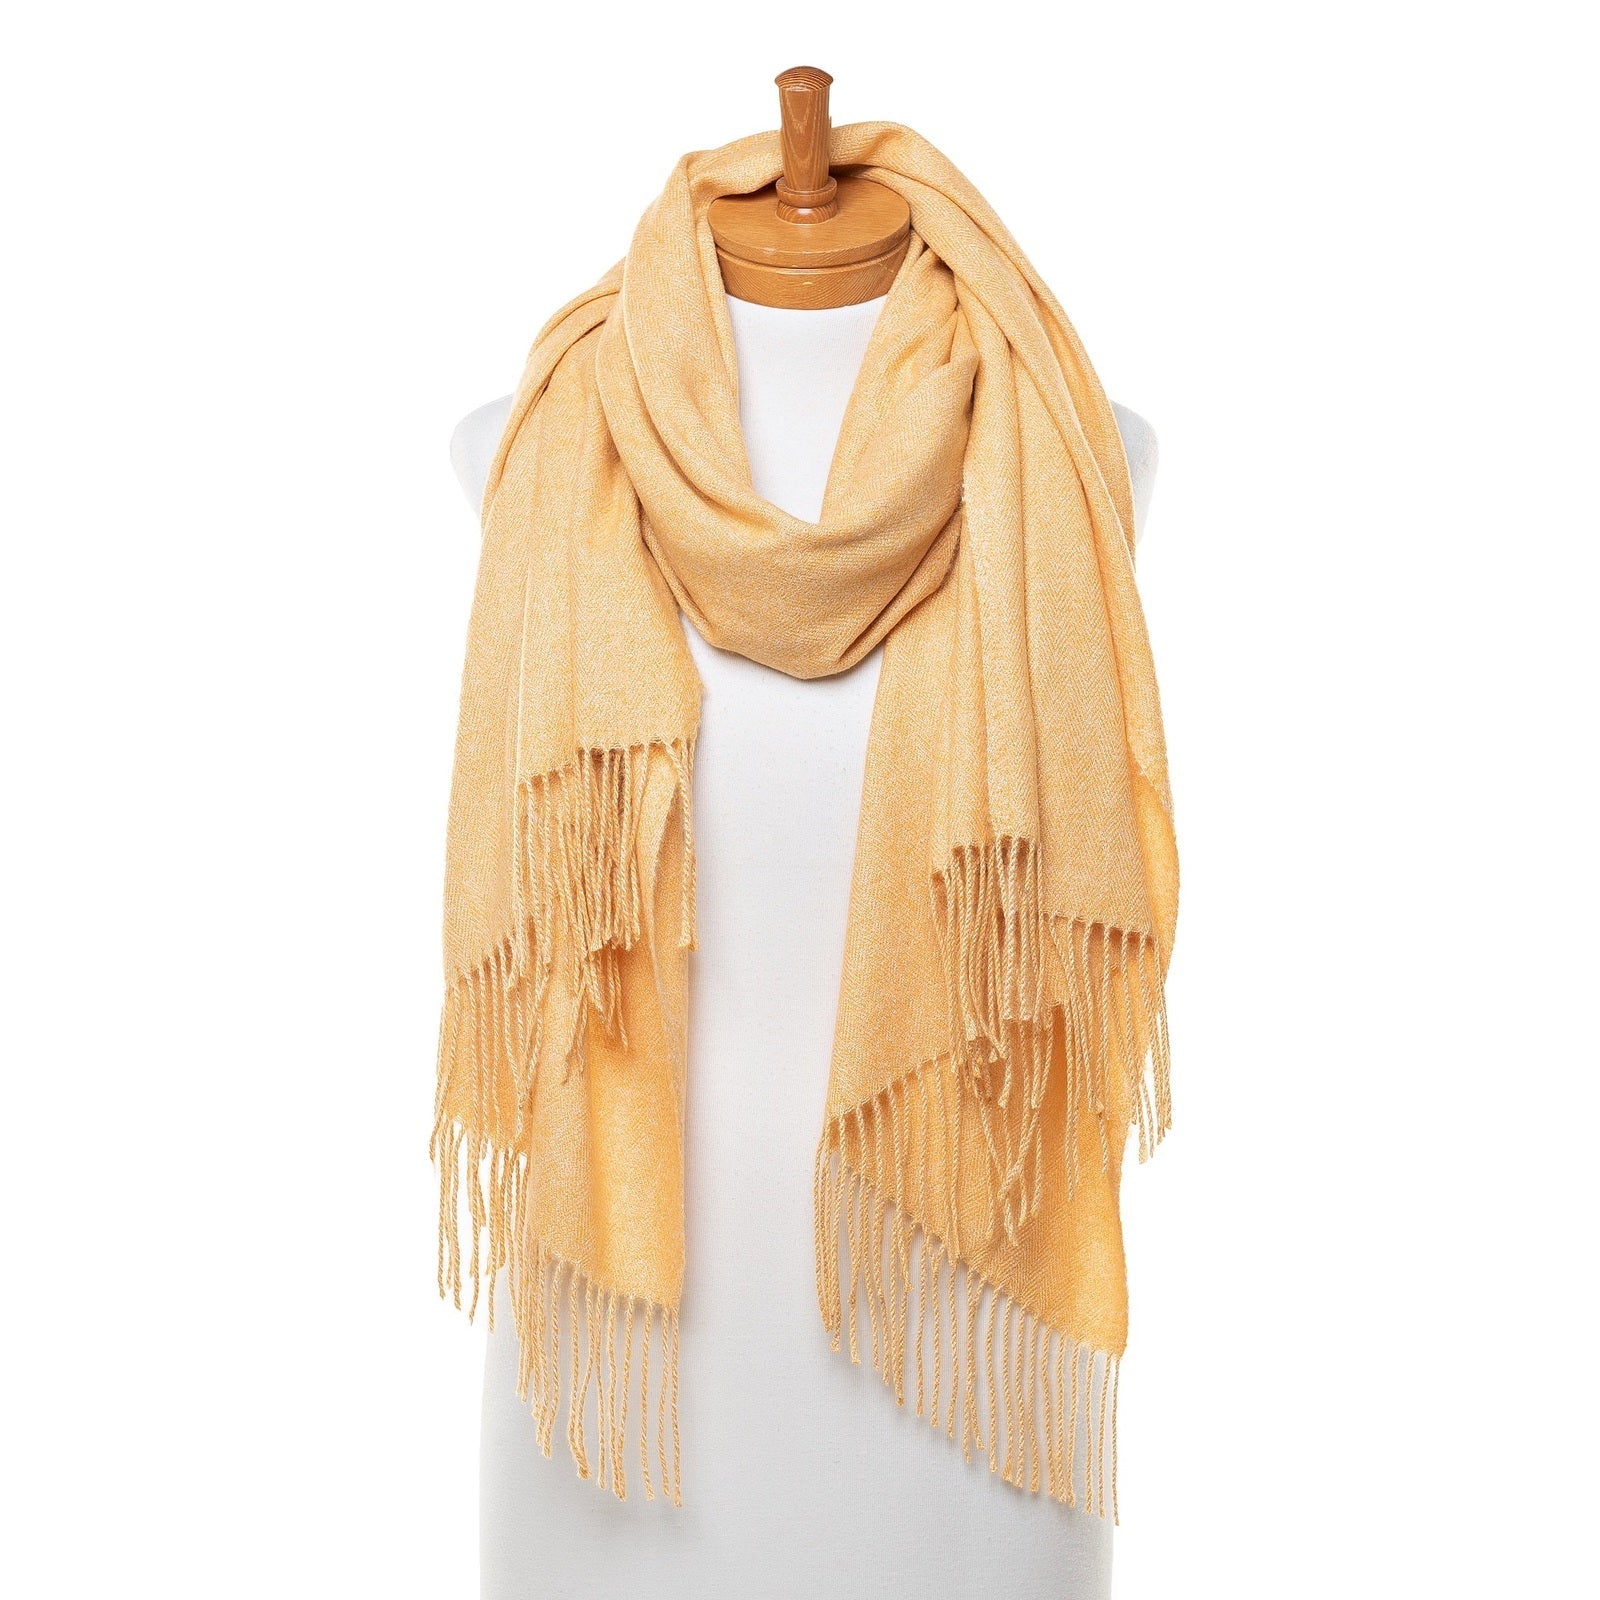 Taylor Hill Brushed Look Scarf - Mustard